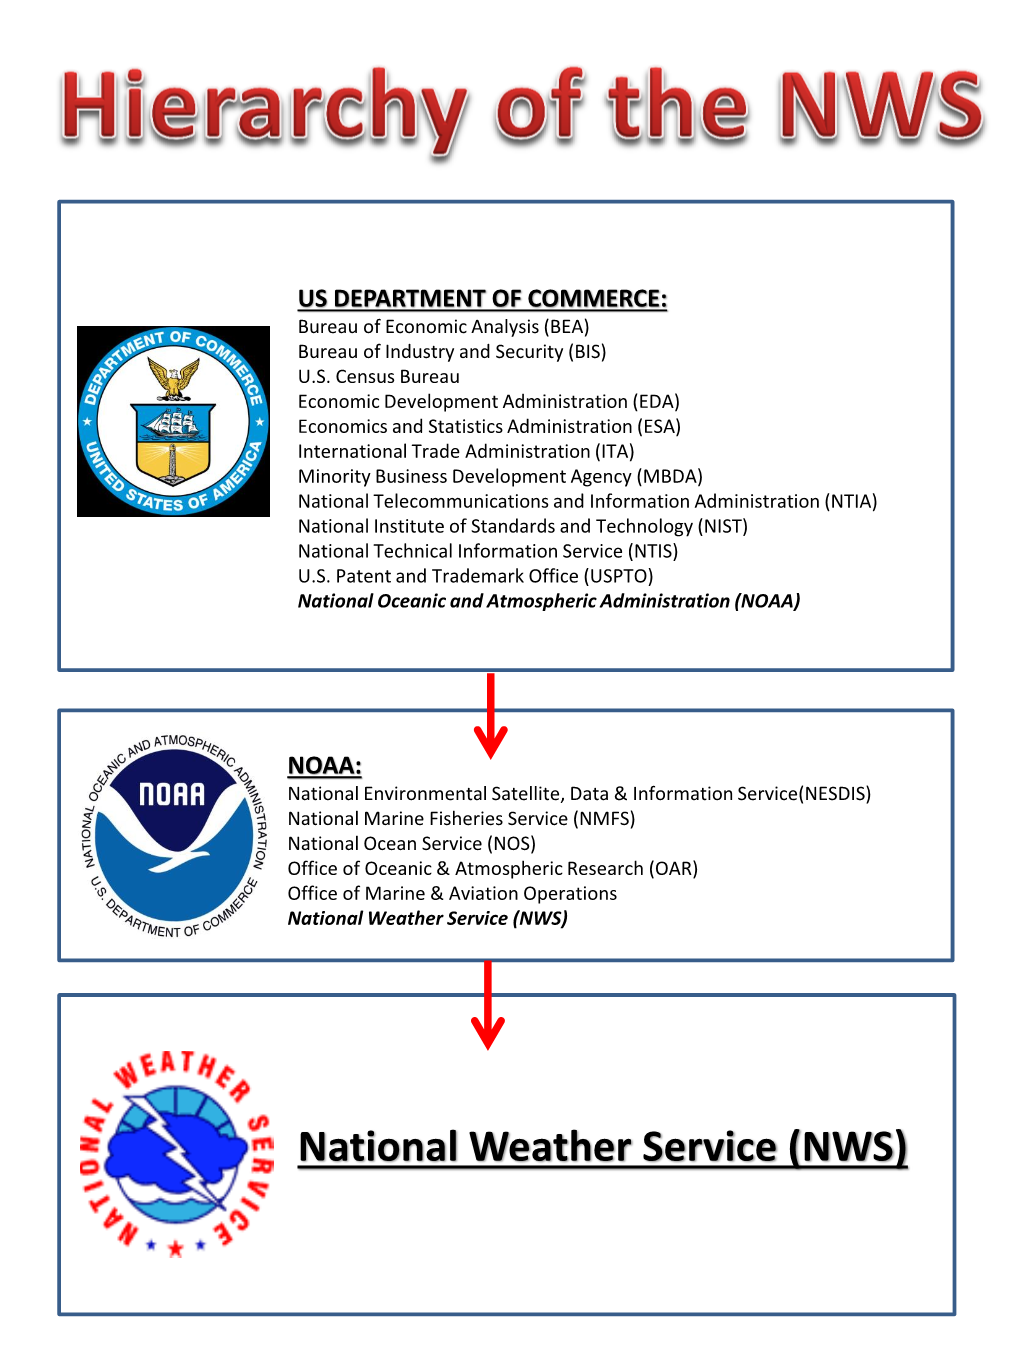 National Weather Service (NWS)